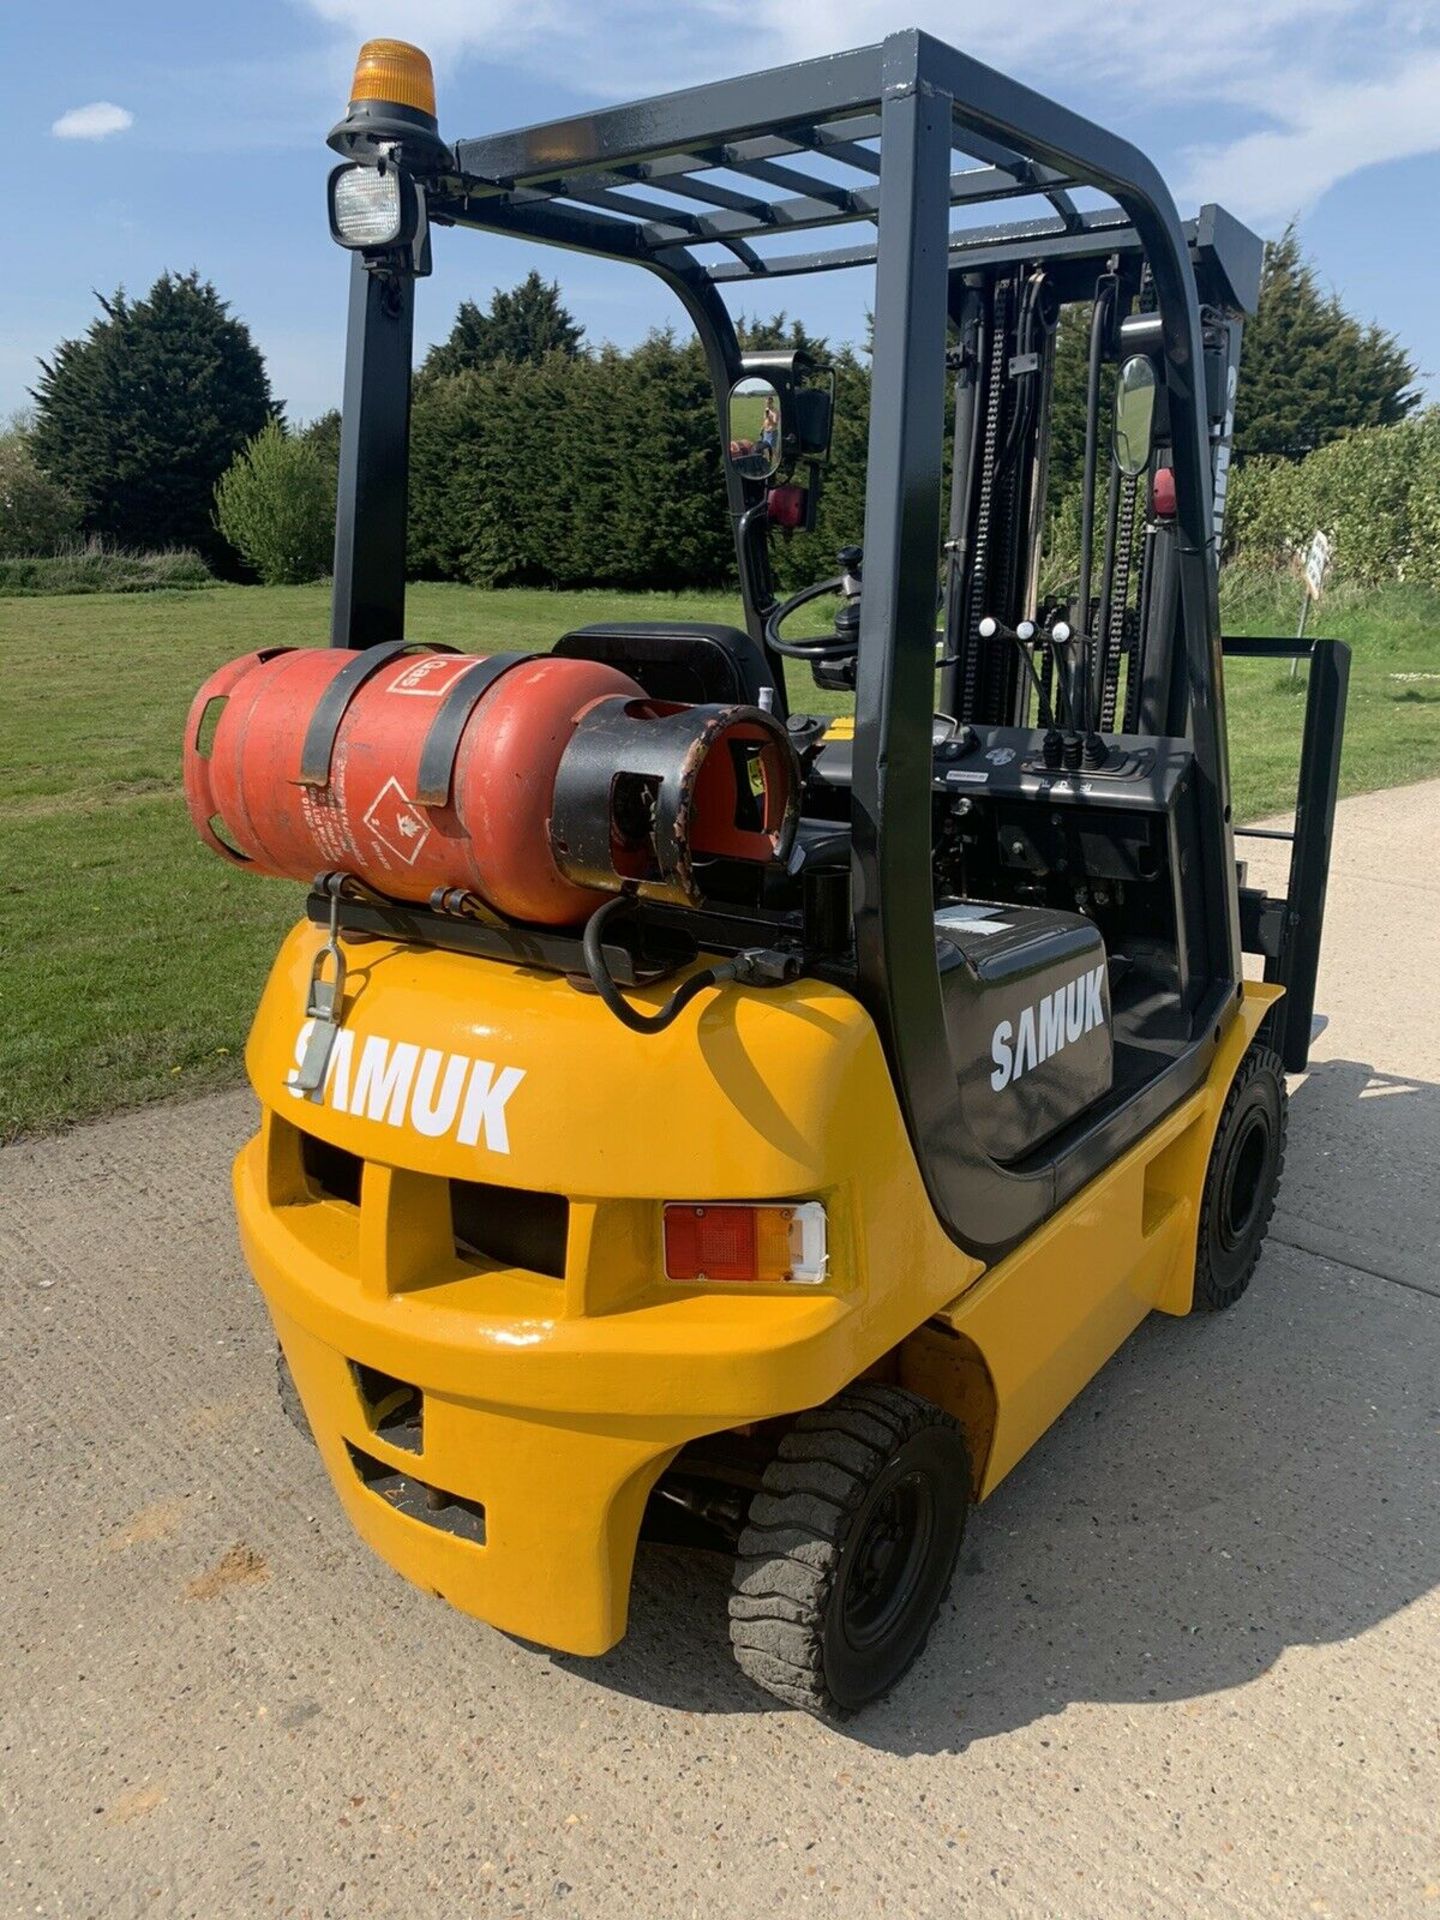 Samuk Gas Container Spec Forklift - Image 4 of 6